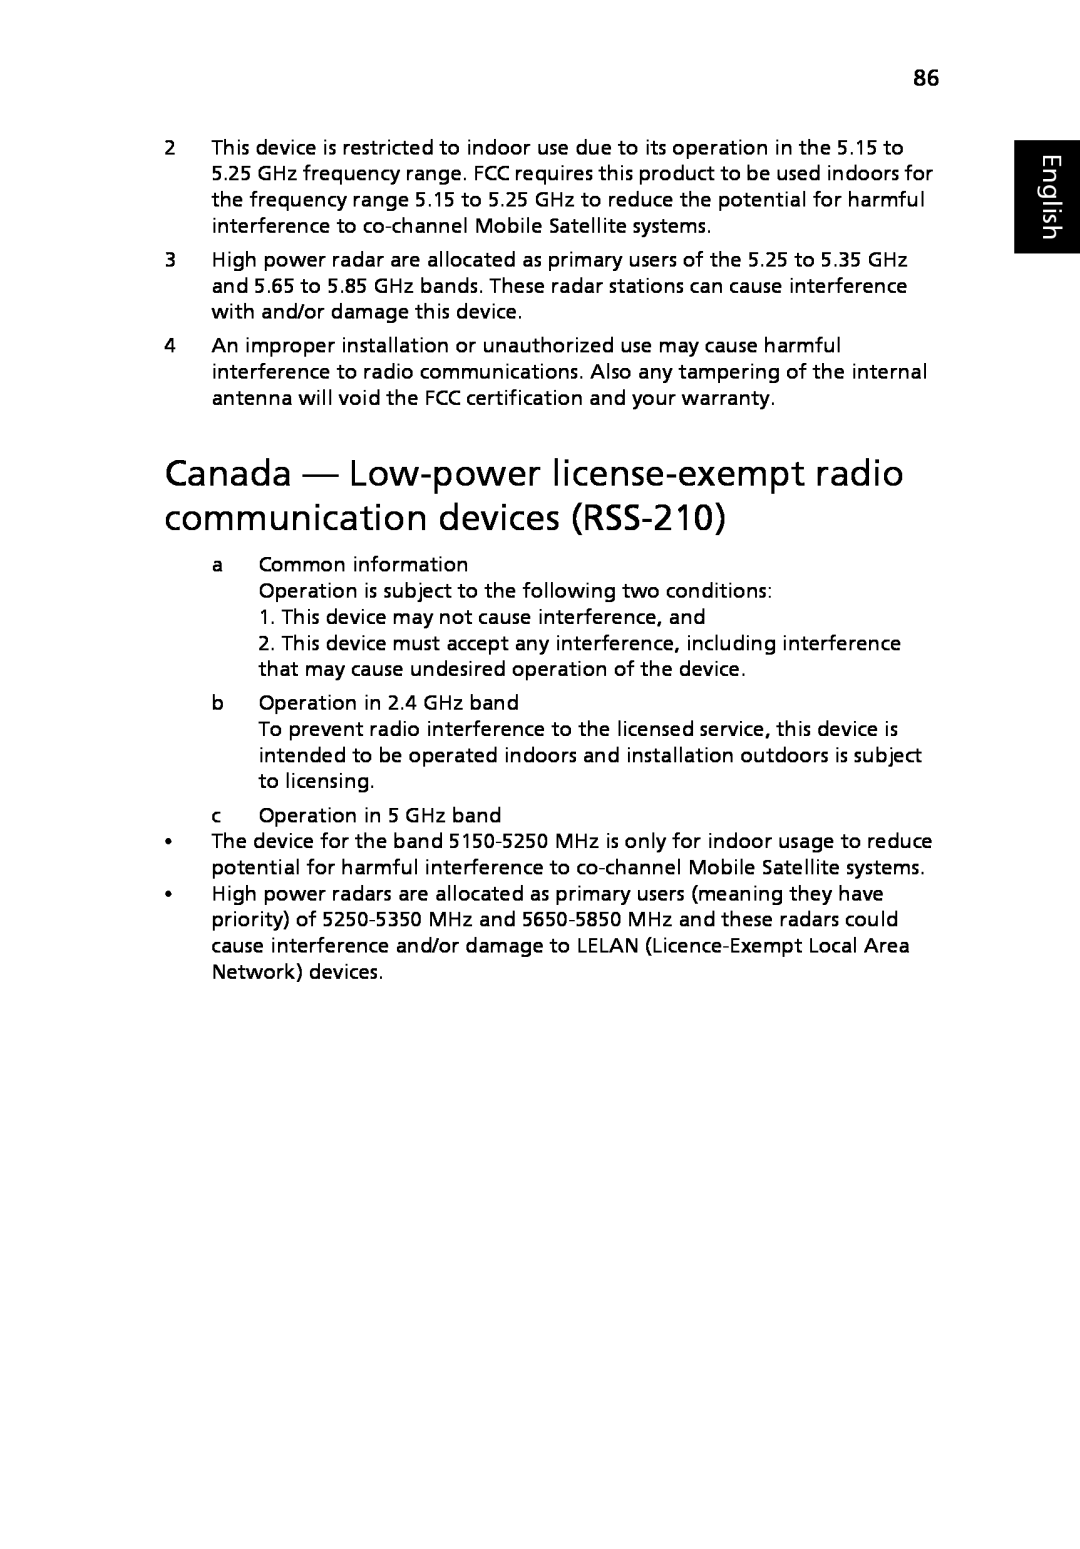 Acer LE1, 8920 Series manual Canada - Low-power license-exempt radio communication devices RSS-210, English 